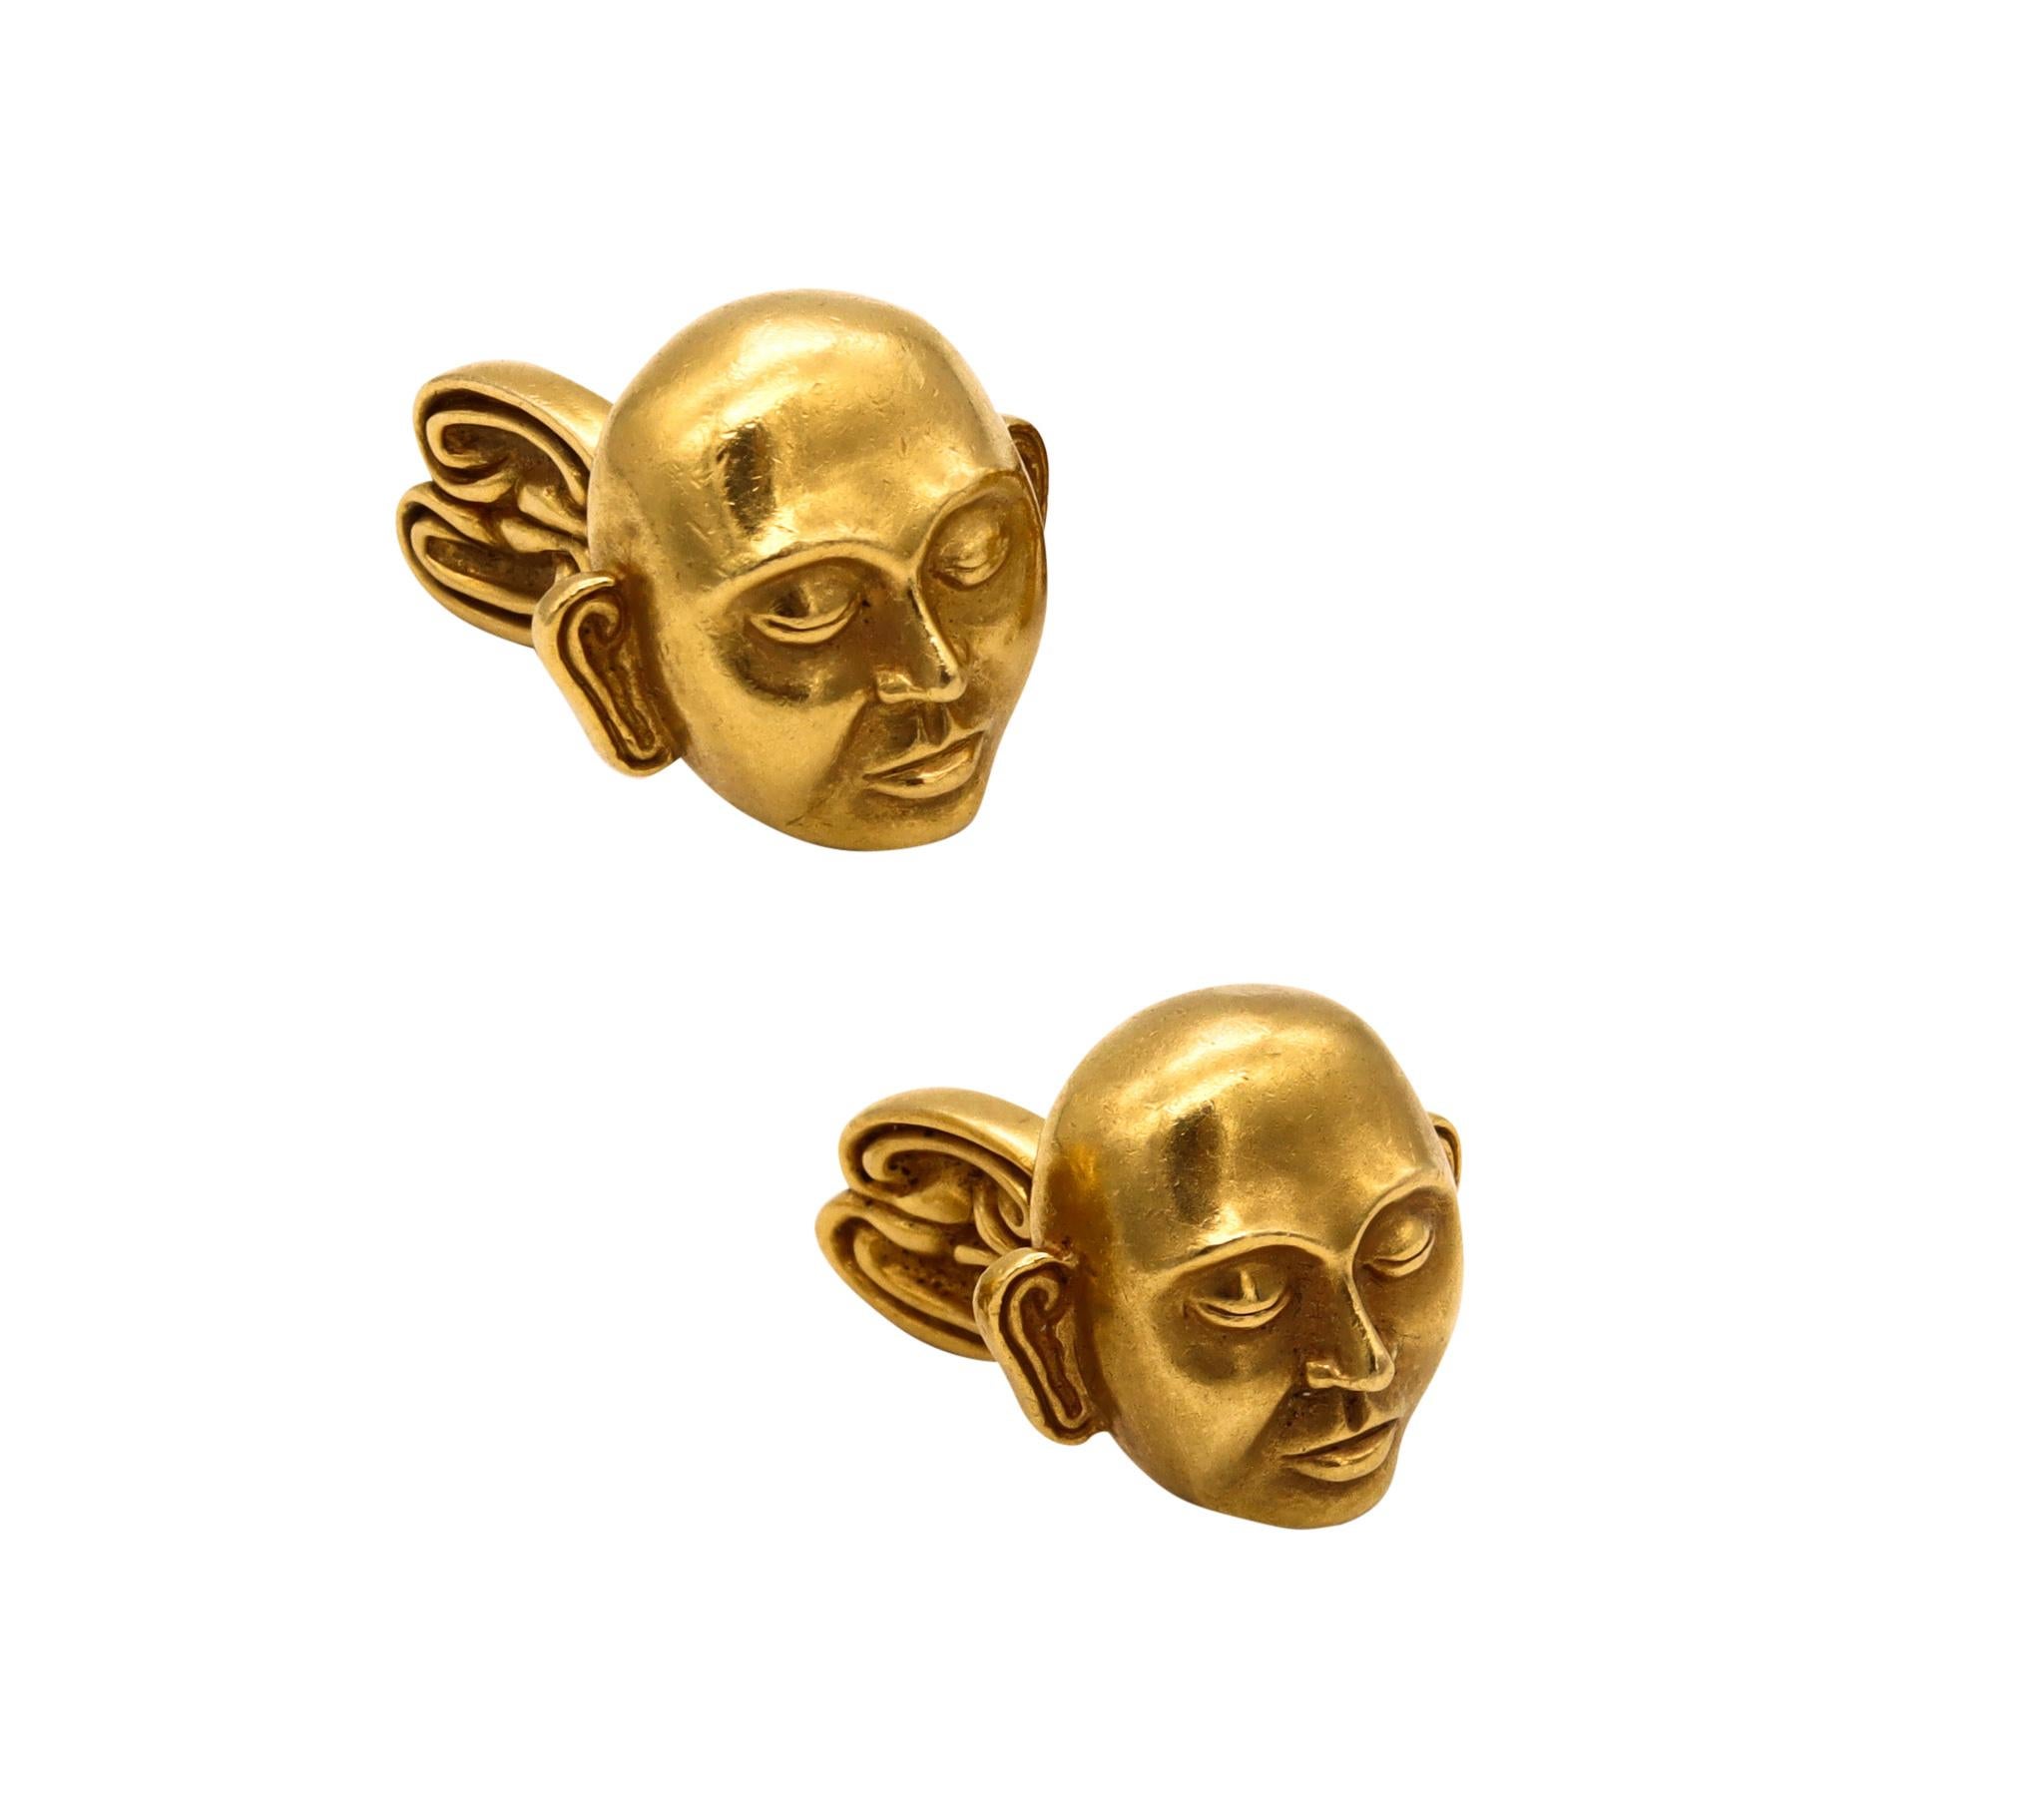 A pair of cufflinks set designed by John Landrum Bryant. 

Beautiful and rare one-of-a-kind pair, created by John Landrum Bryant in New York City in 2000. These cufflinks are sculpted with the bald face of a Tibetan monk very similar to oriental